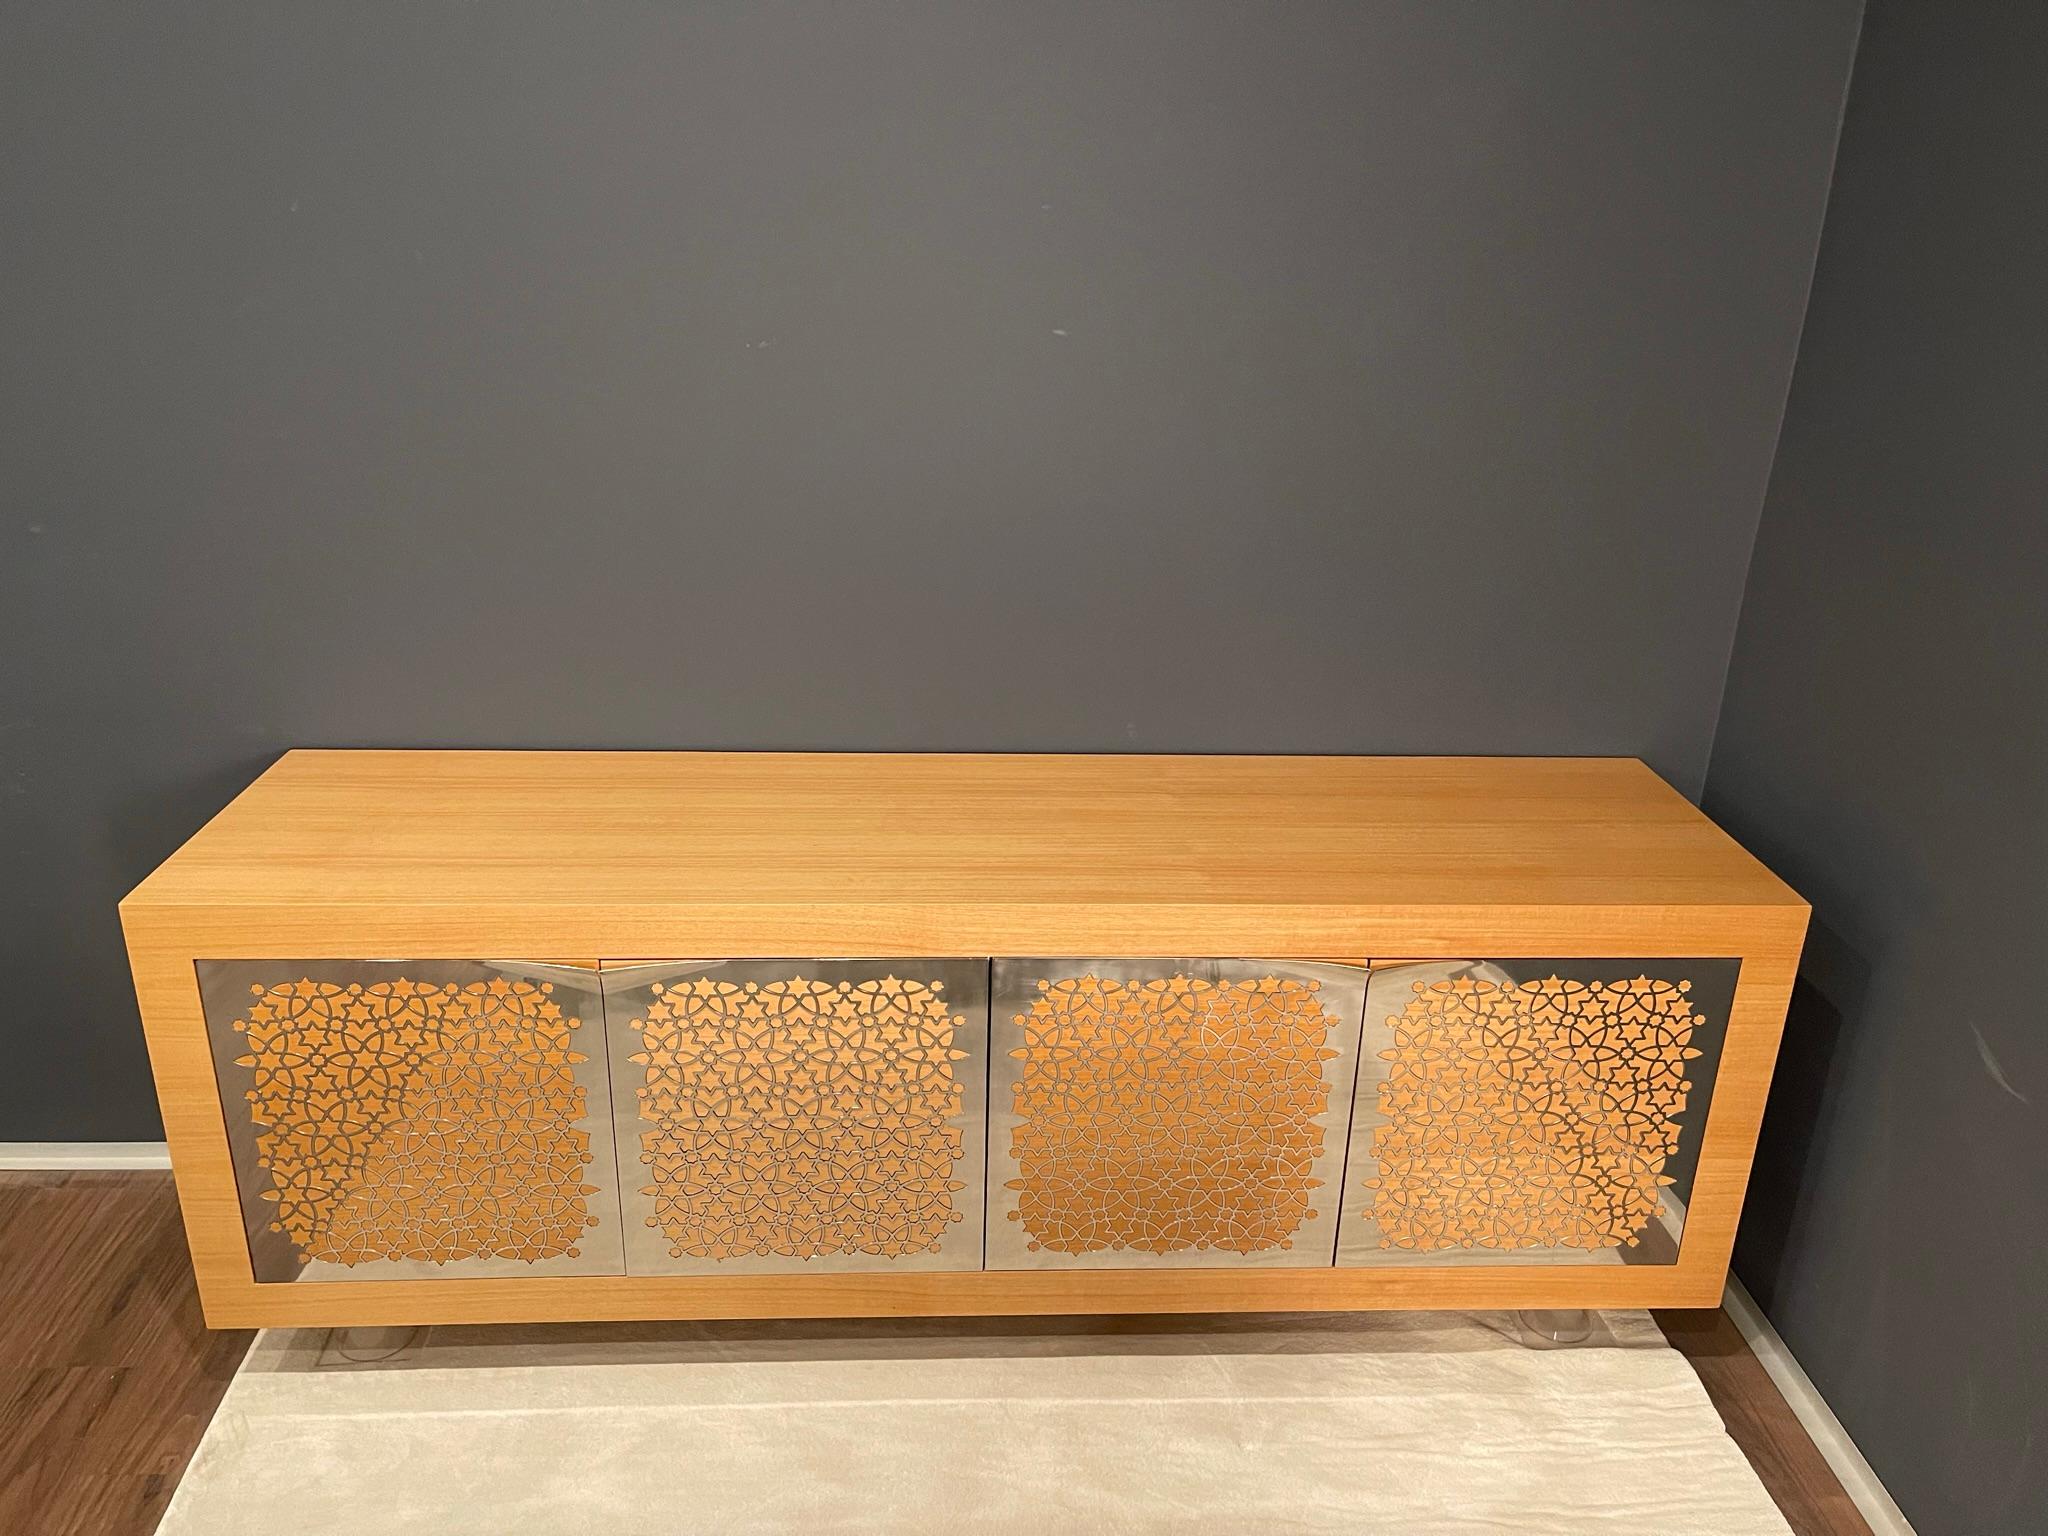 Portuguese Modern Suspended Credenza Sideboard in Oak Wood and Polished Stainless Steel For Sale